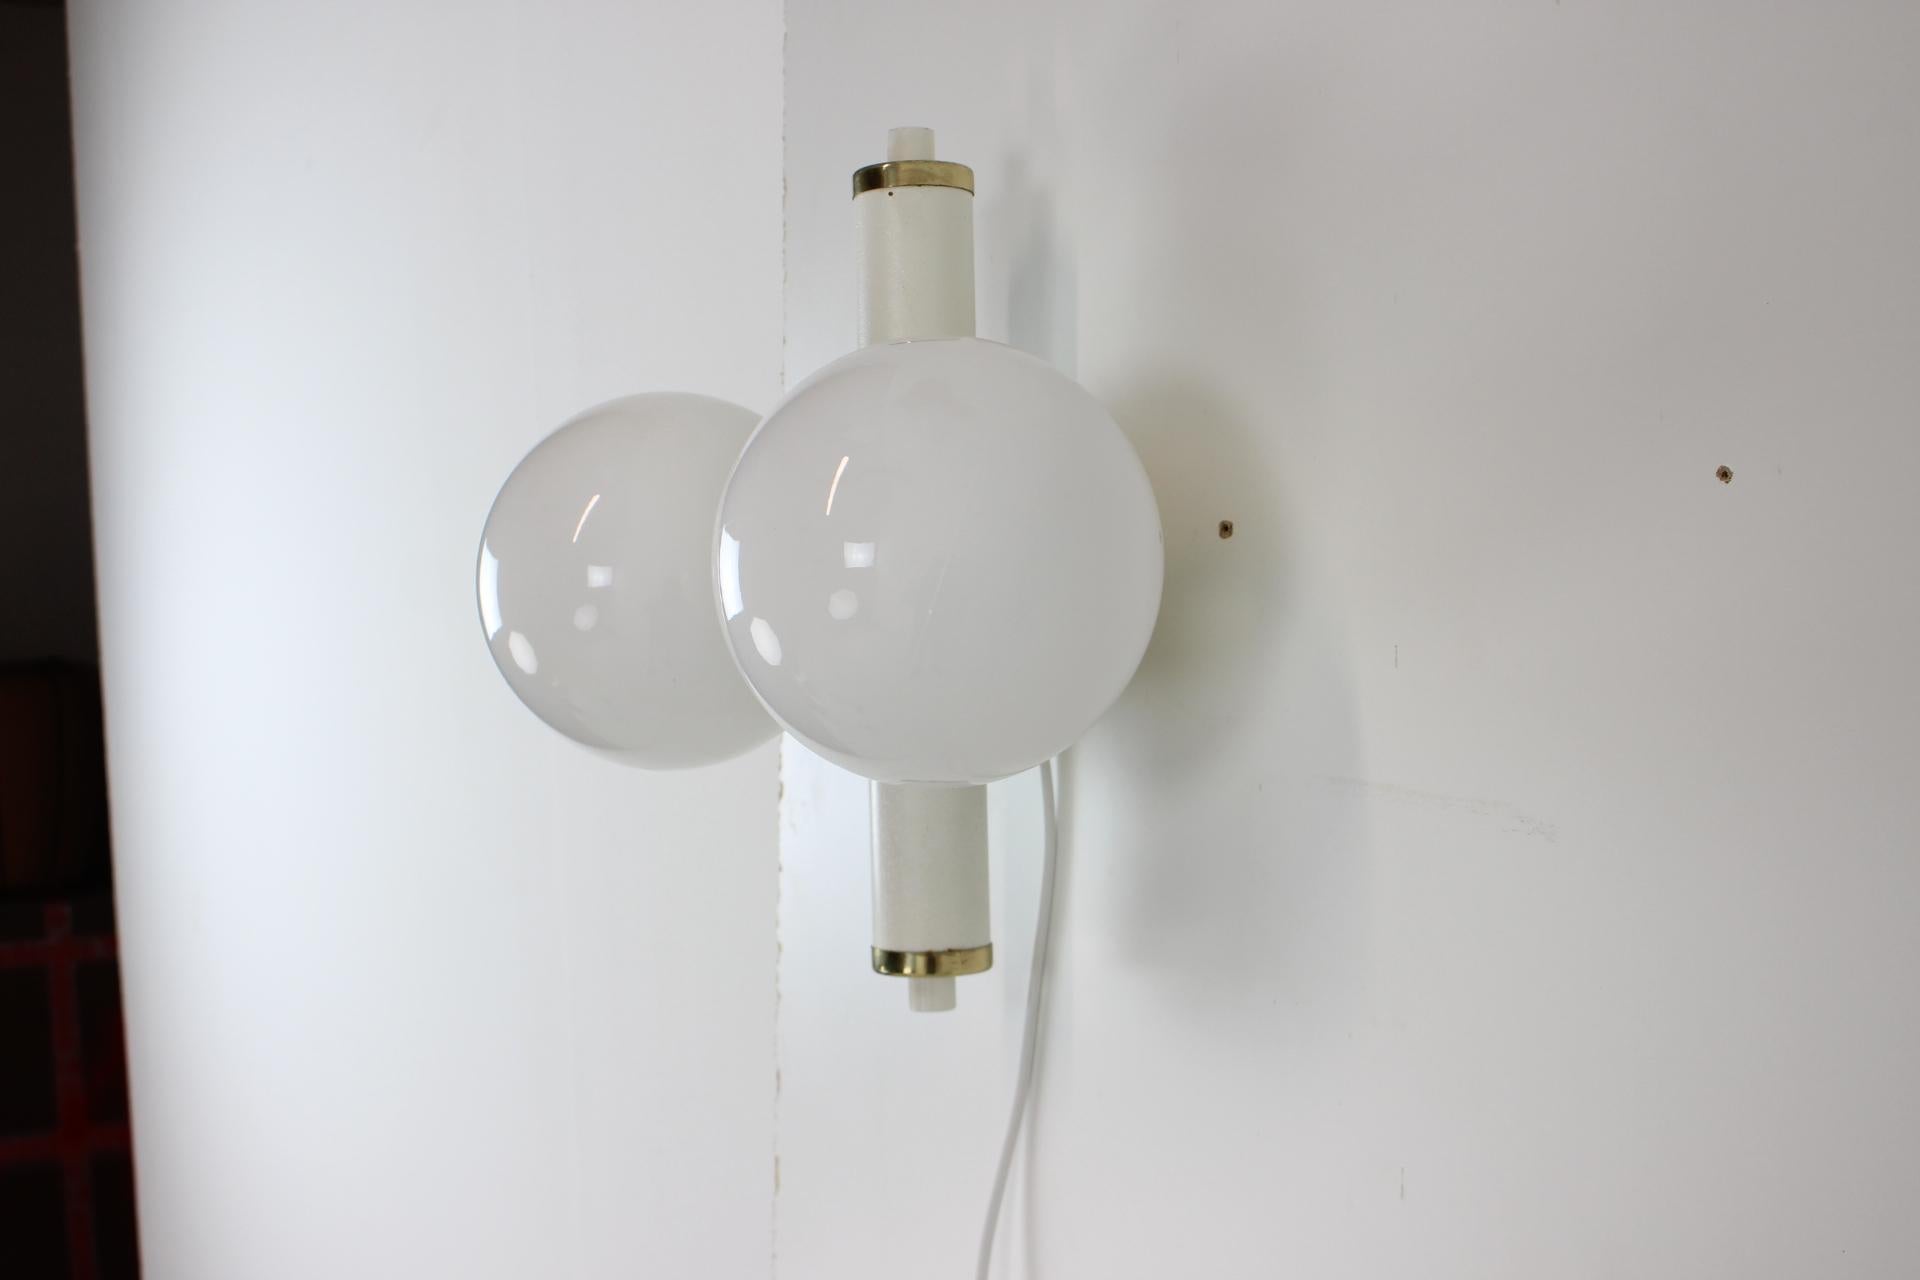 Made in Czechoslovakia
Made of milk glass, lacquered metal
2x60W,E27 or E26 socket
Re-polished
Fully functional
Original condition
New cables.